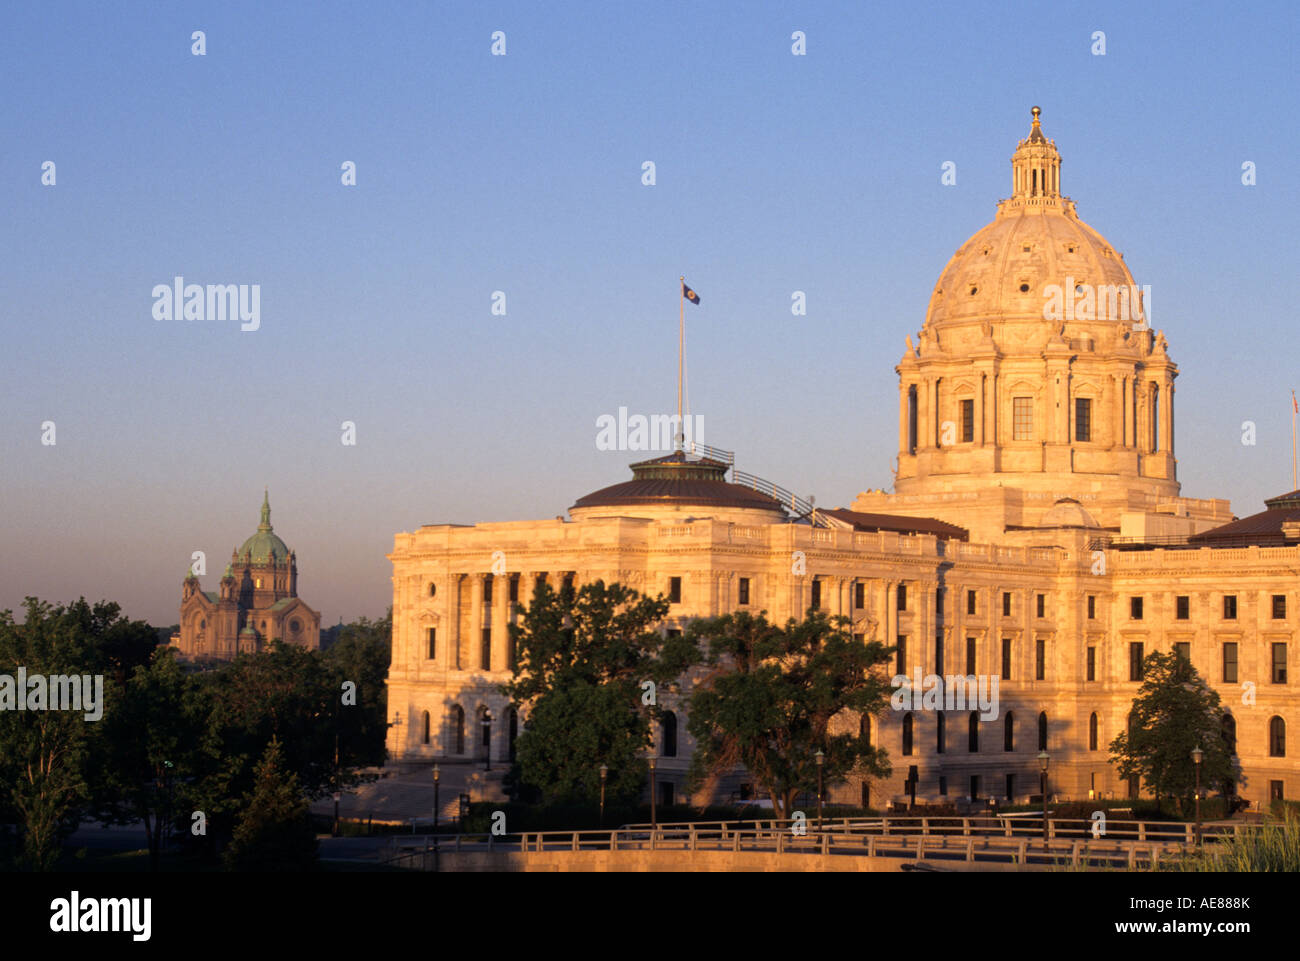 MINNESOTA STATE CAPITOL AND ST. PAUL CATHEDRAL, ST. PAUL, MINNESOTA. SUMMER. TWIN CITIES Stock Photo